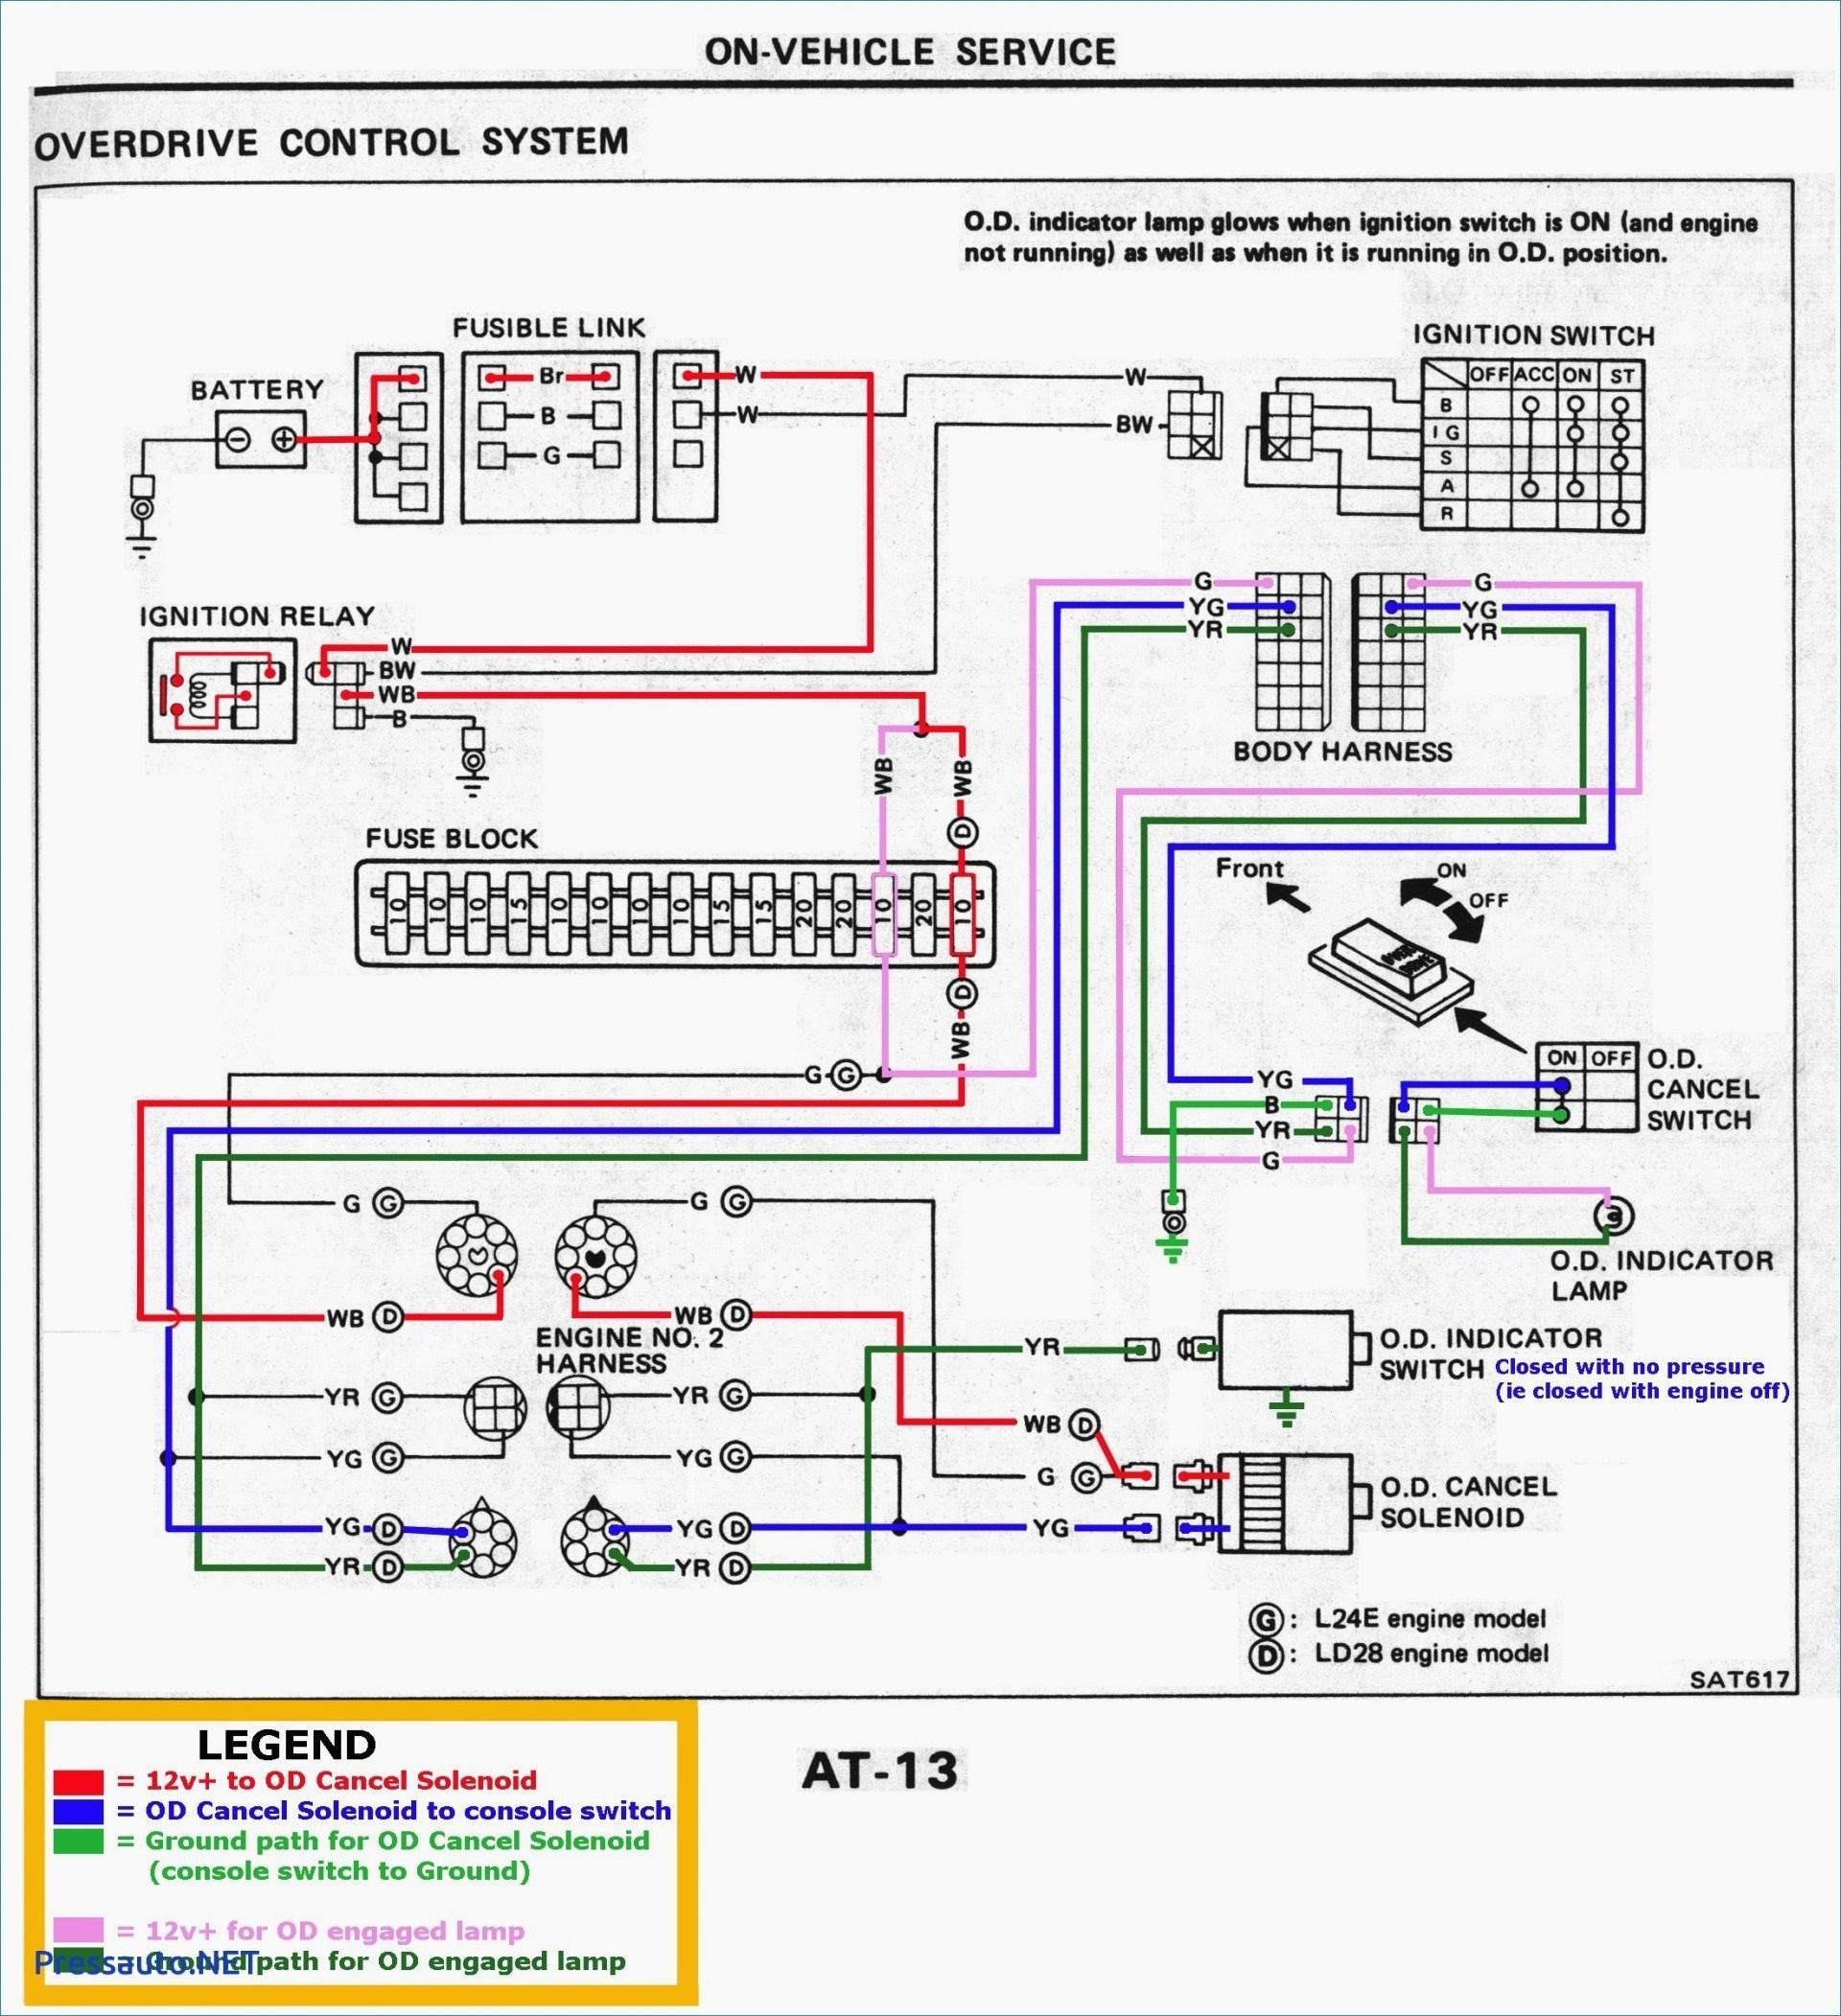 Home Electrical Wiring Diagram Lovely House Electrical Wiring Diagram Australia Valid Wiring Diagram Fresh Home